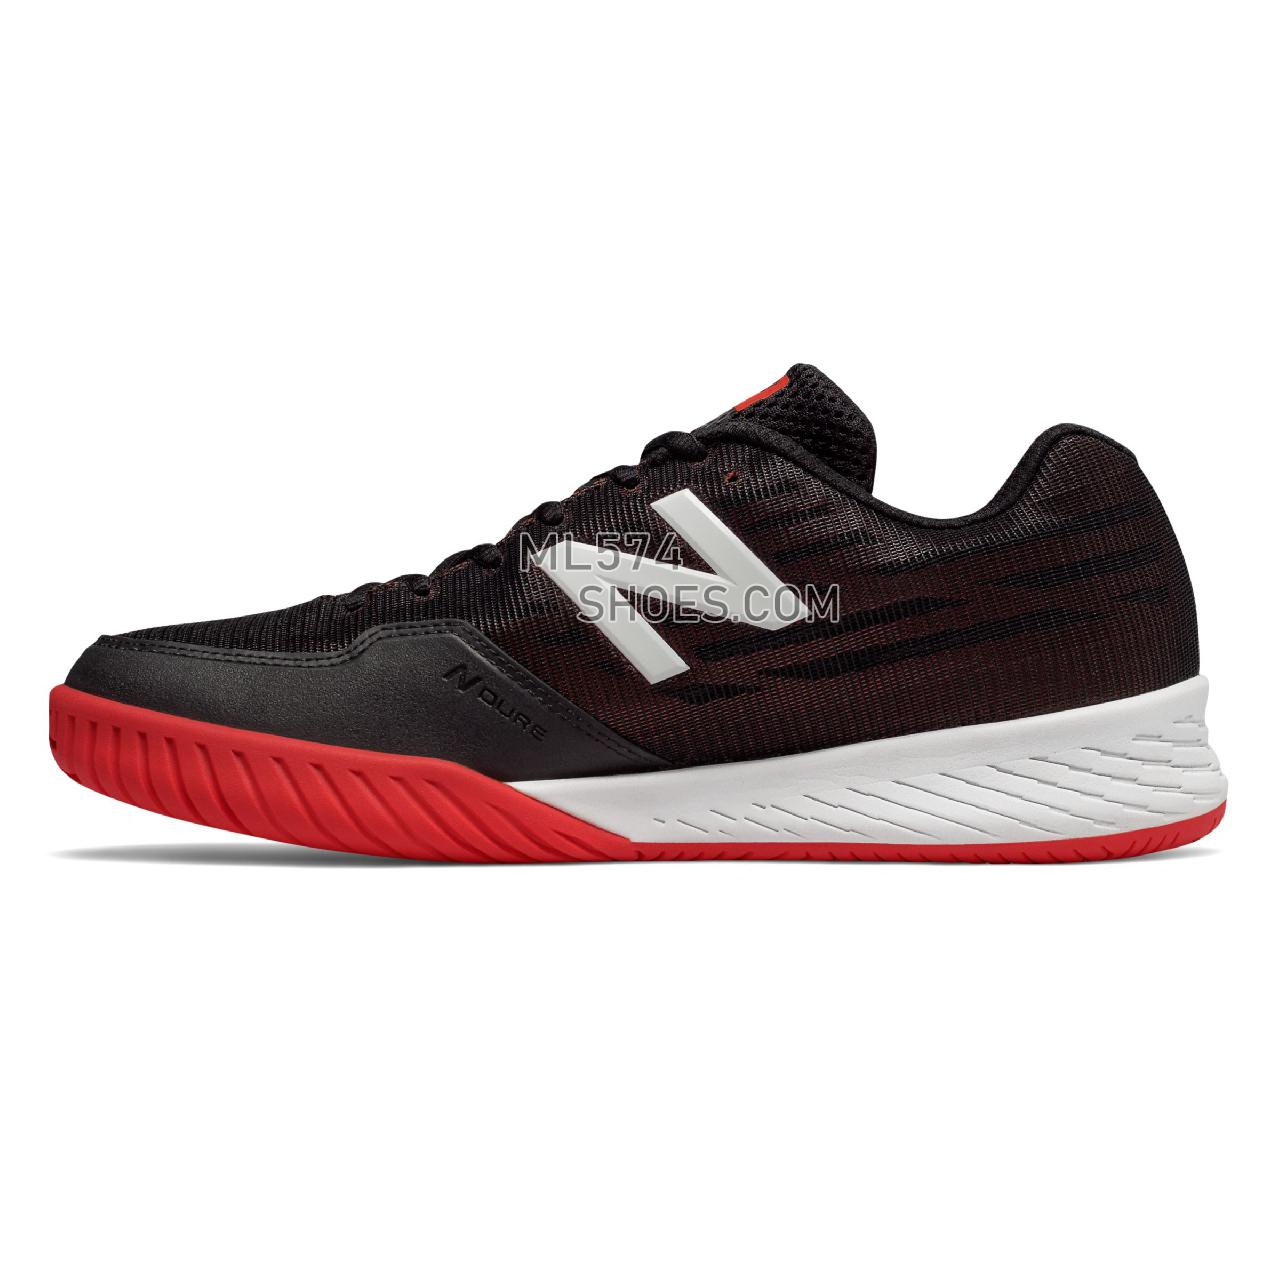 New Balance 896v2 - Men's 896 - Tennis / Court Black with Flame and White - MCH896F2